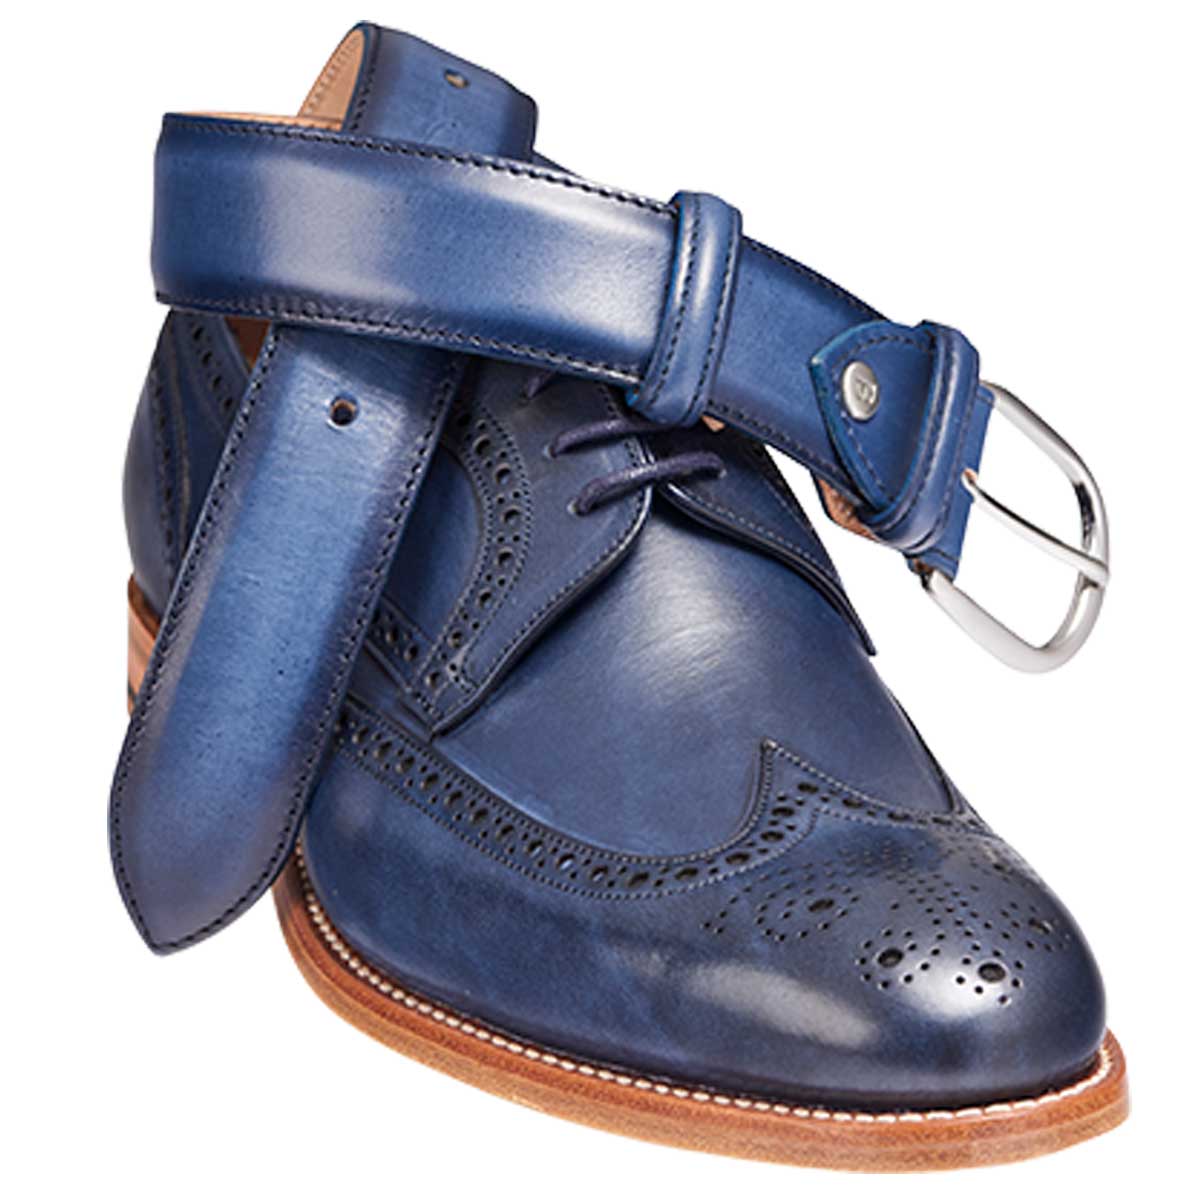 Barker Navy Hand Painted Shoe with Matching Belt